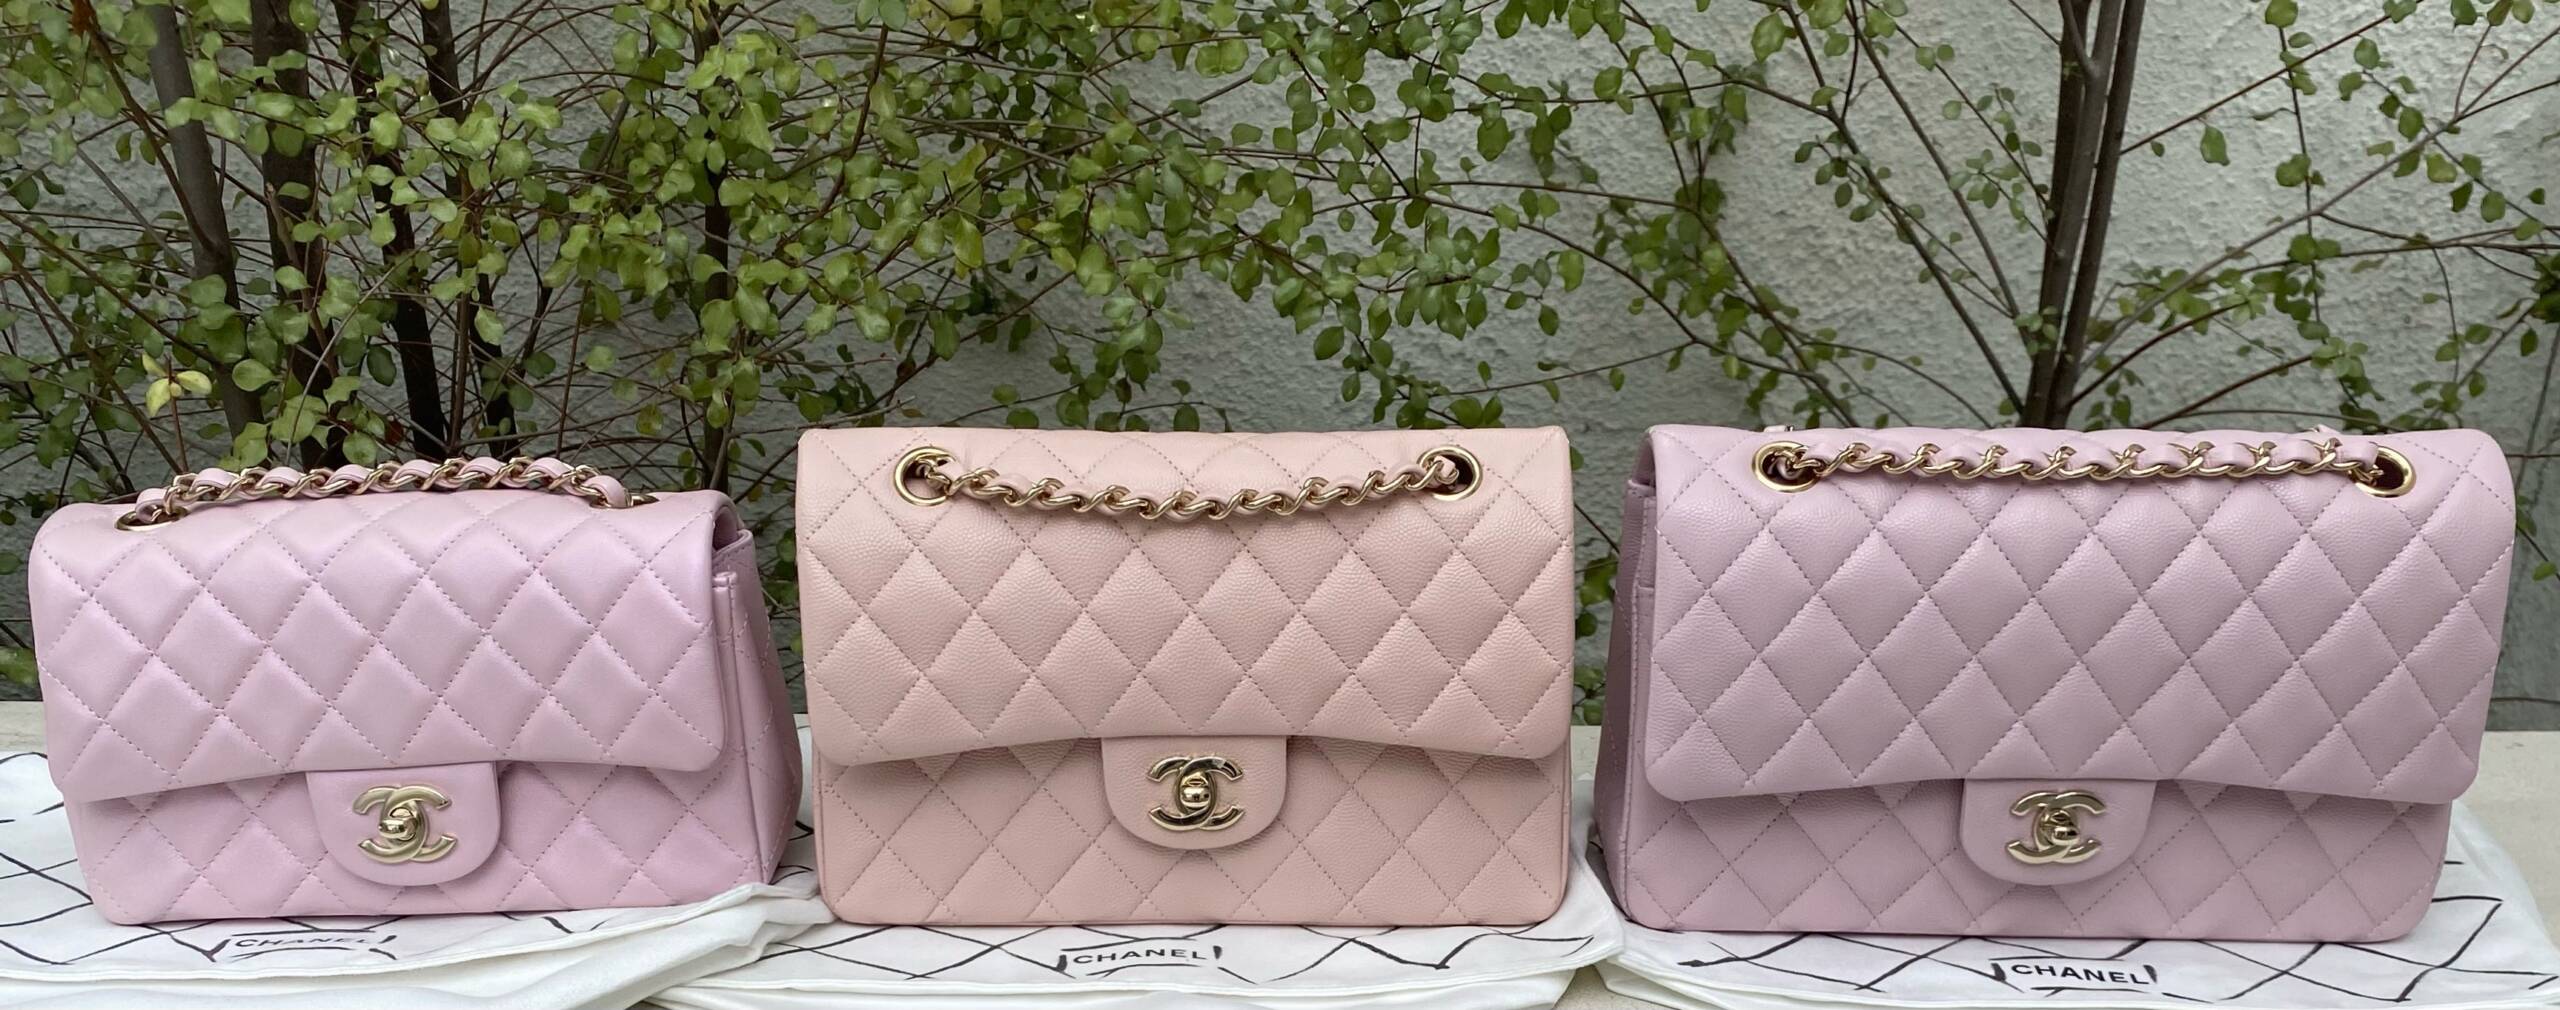 Chanel Light Pink Quilted Lambskin Medium Classic Double Flap Bag  Worlds  Best